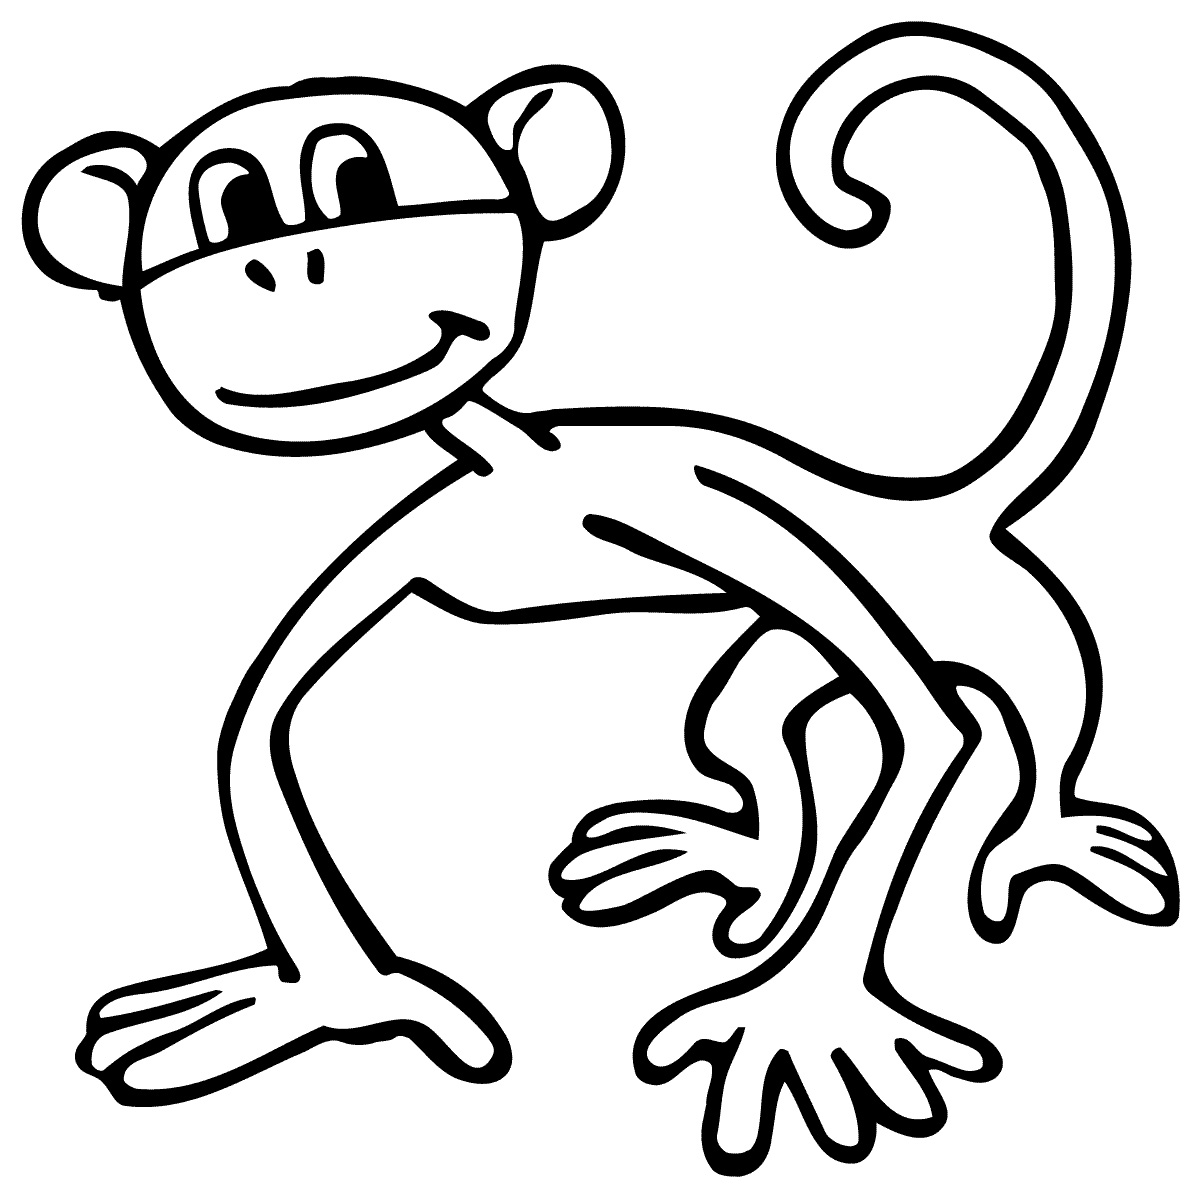 Monkey Clip Art Images - Clipart library